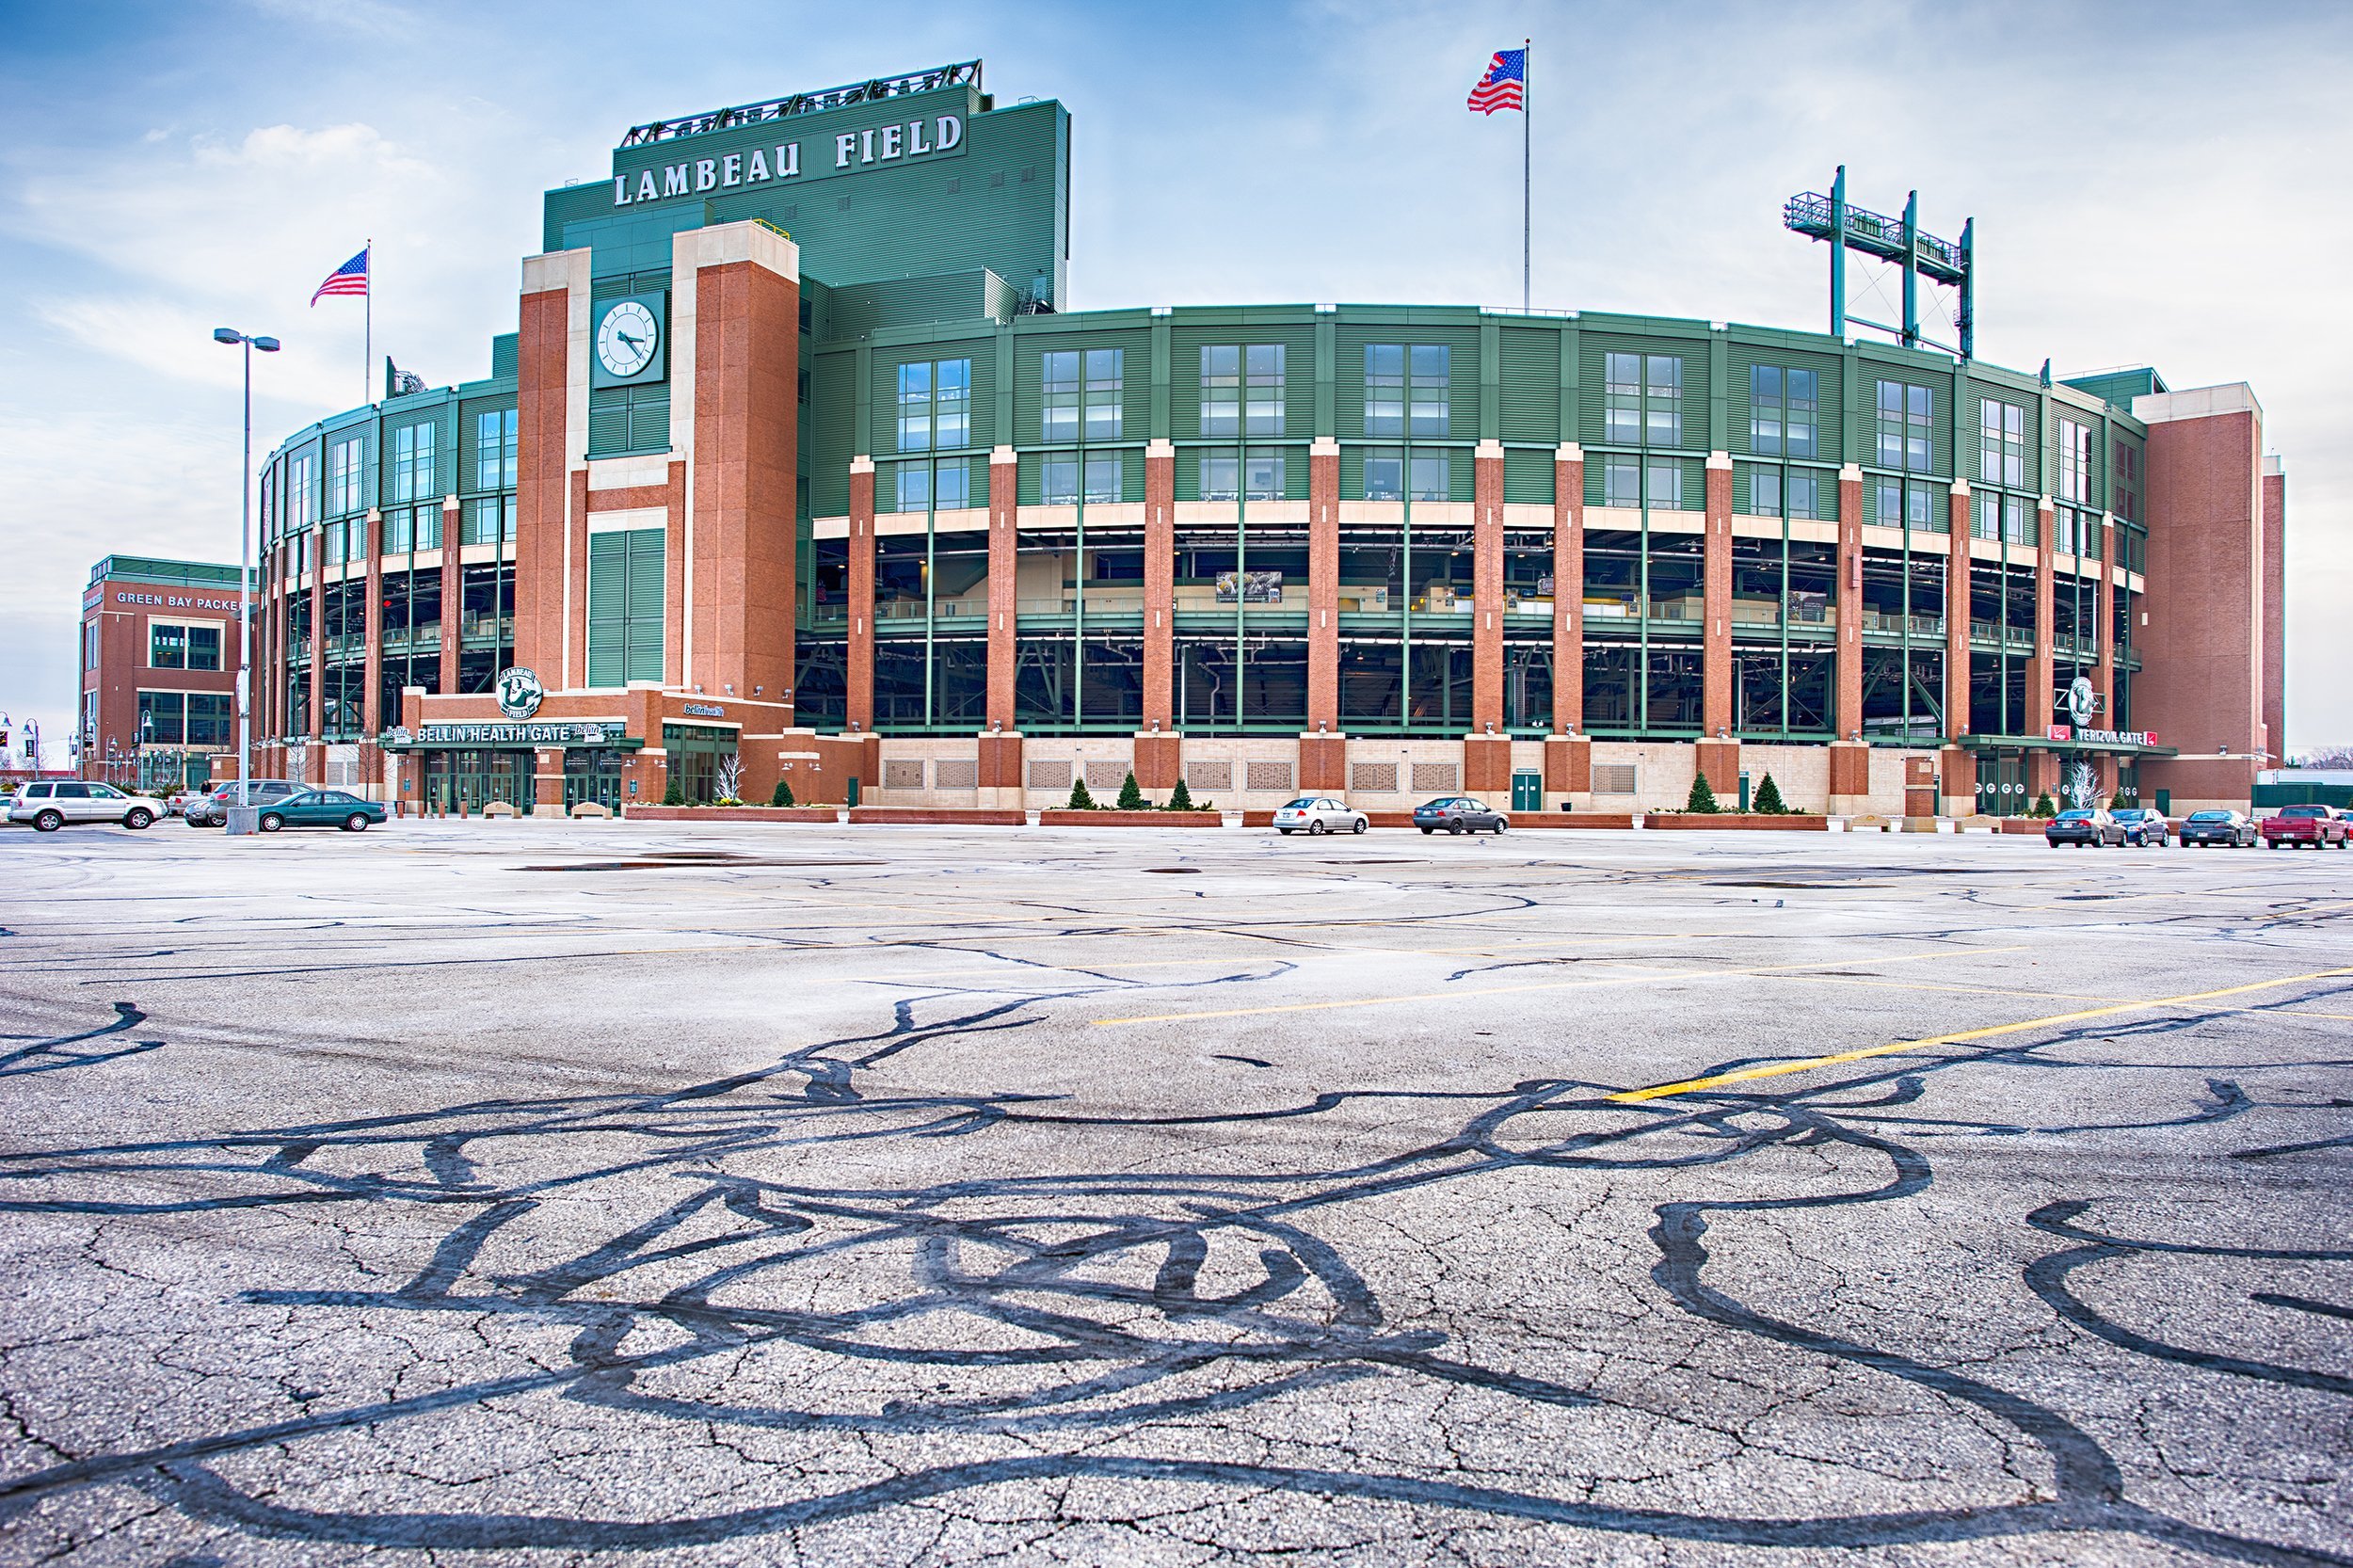 <p>Theme parks and <em>park</em> parks dominate the top of our attractions category. The exception is second-placed Lambeau Field in Green Bay. The legendary stadium of the Green Bay Packers is known for being a chilly proposition: three hours of standing in an open-air stadium in Wisconsin? Wrap up warm!</p>